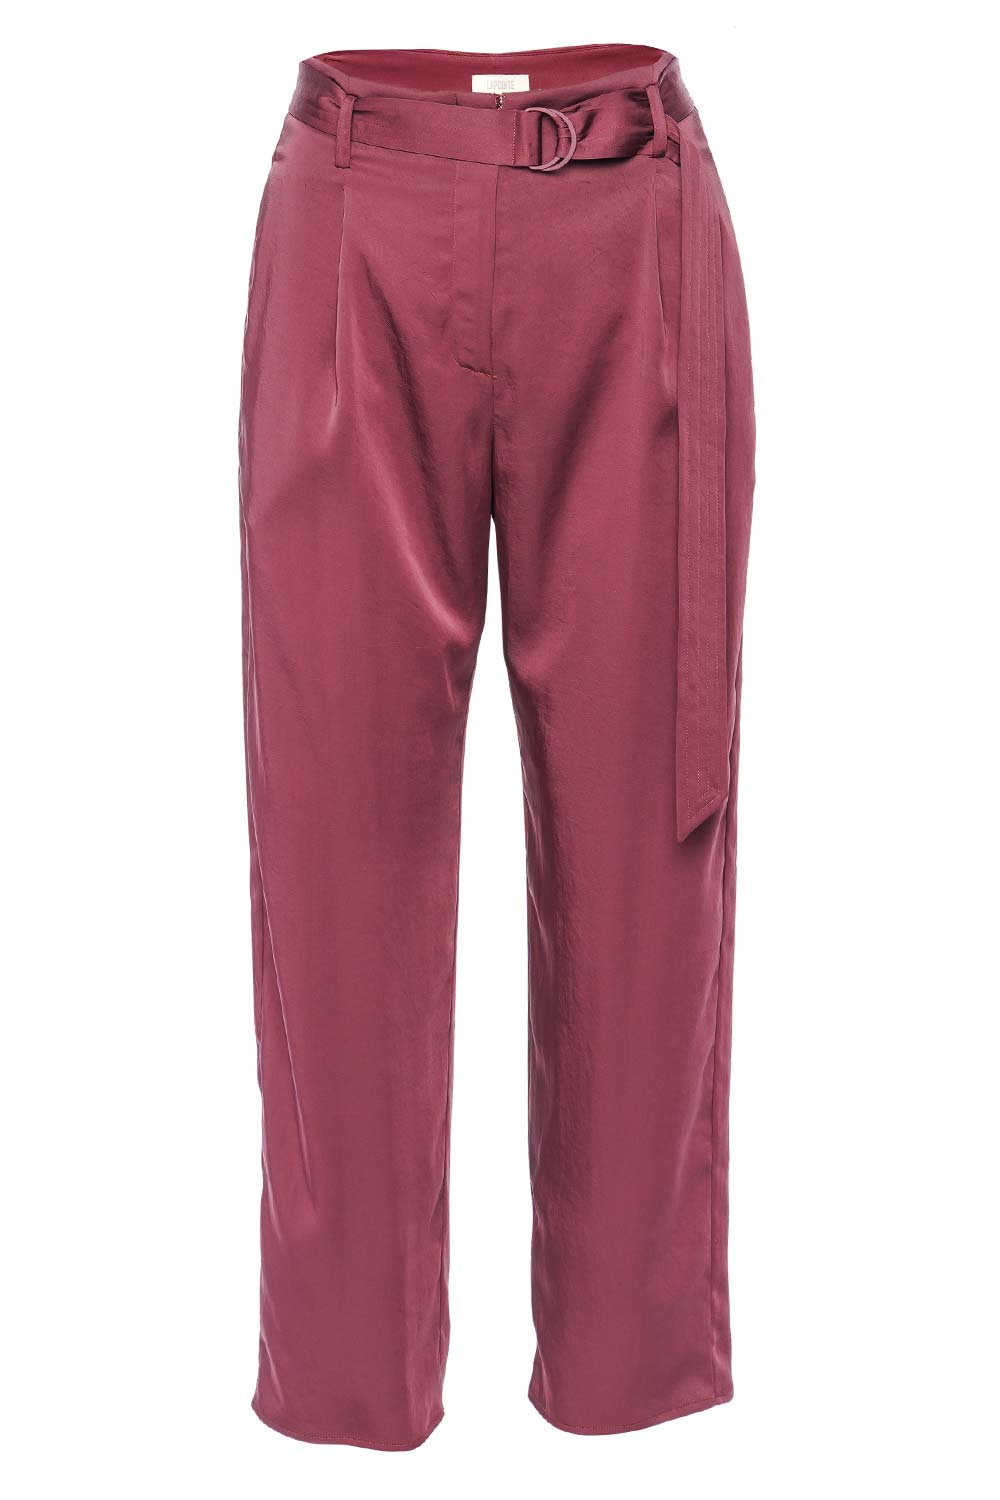 LAPOINTE Merlot Satin Belted Cropped Pant